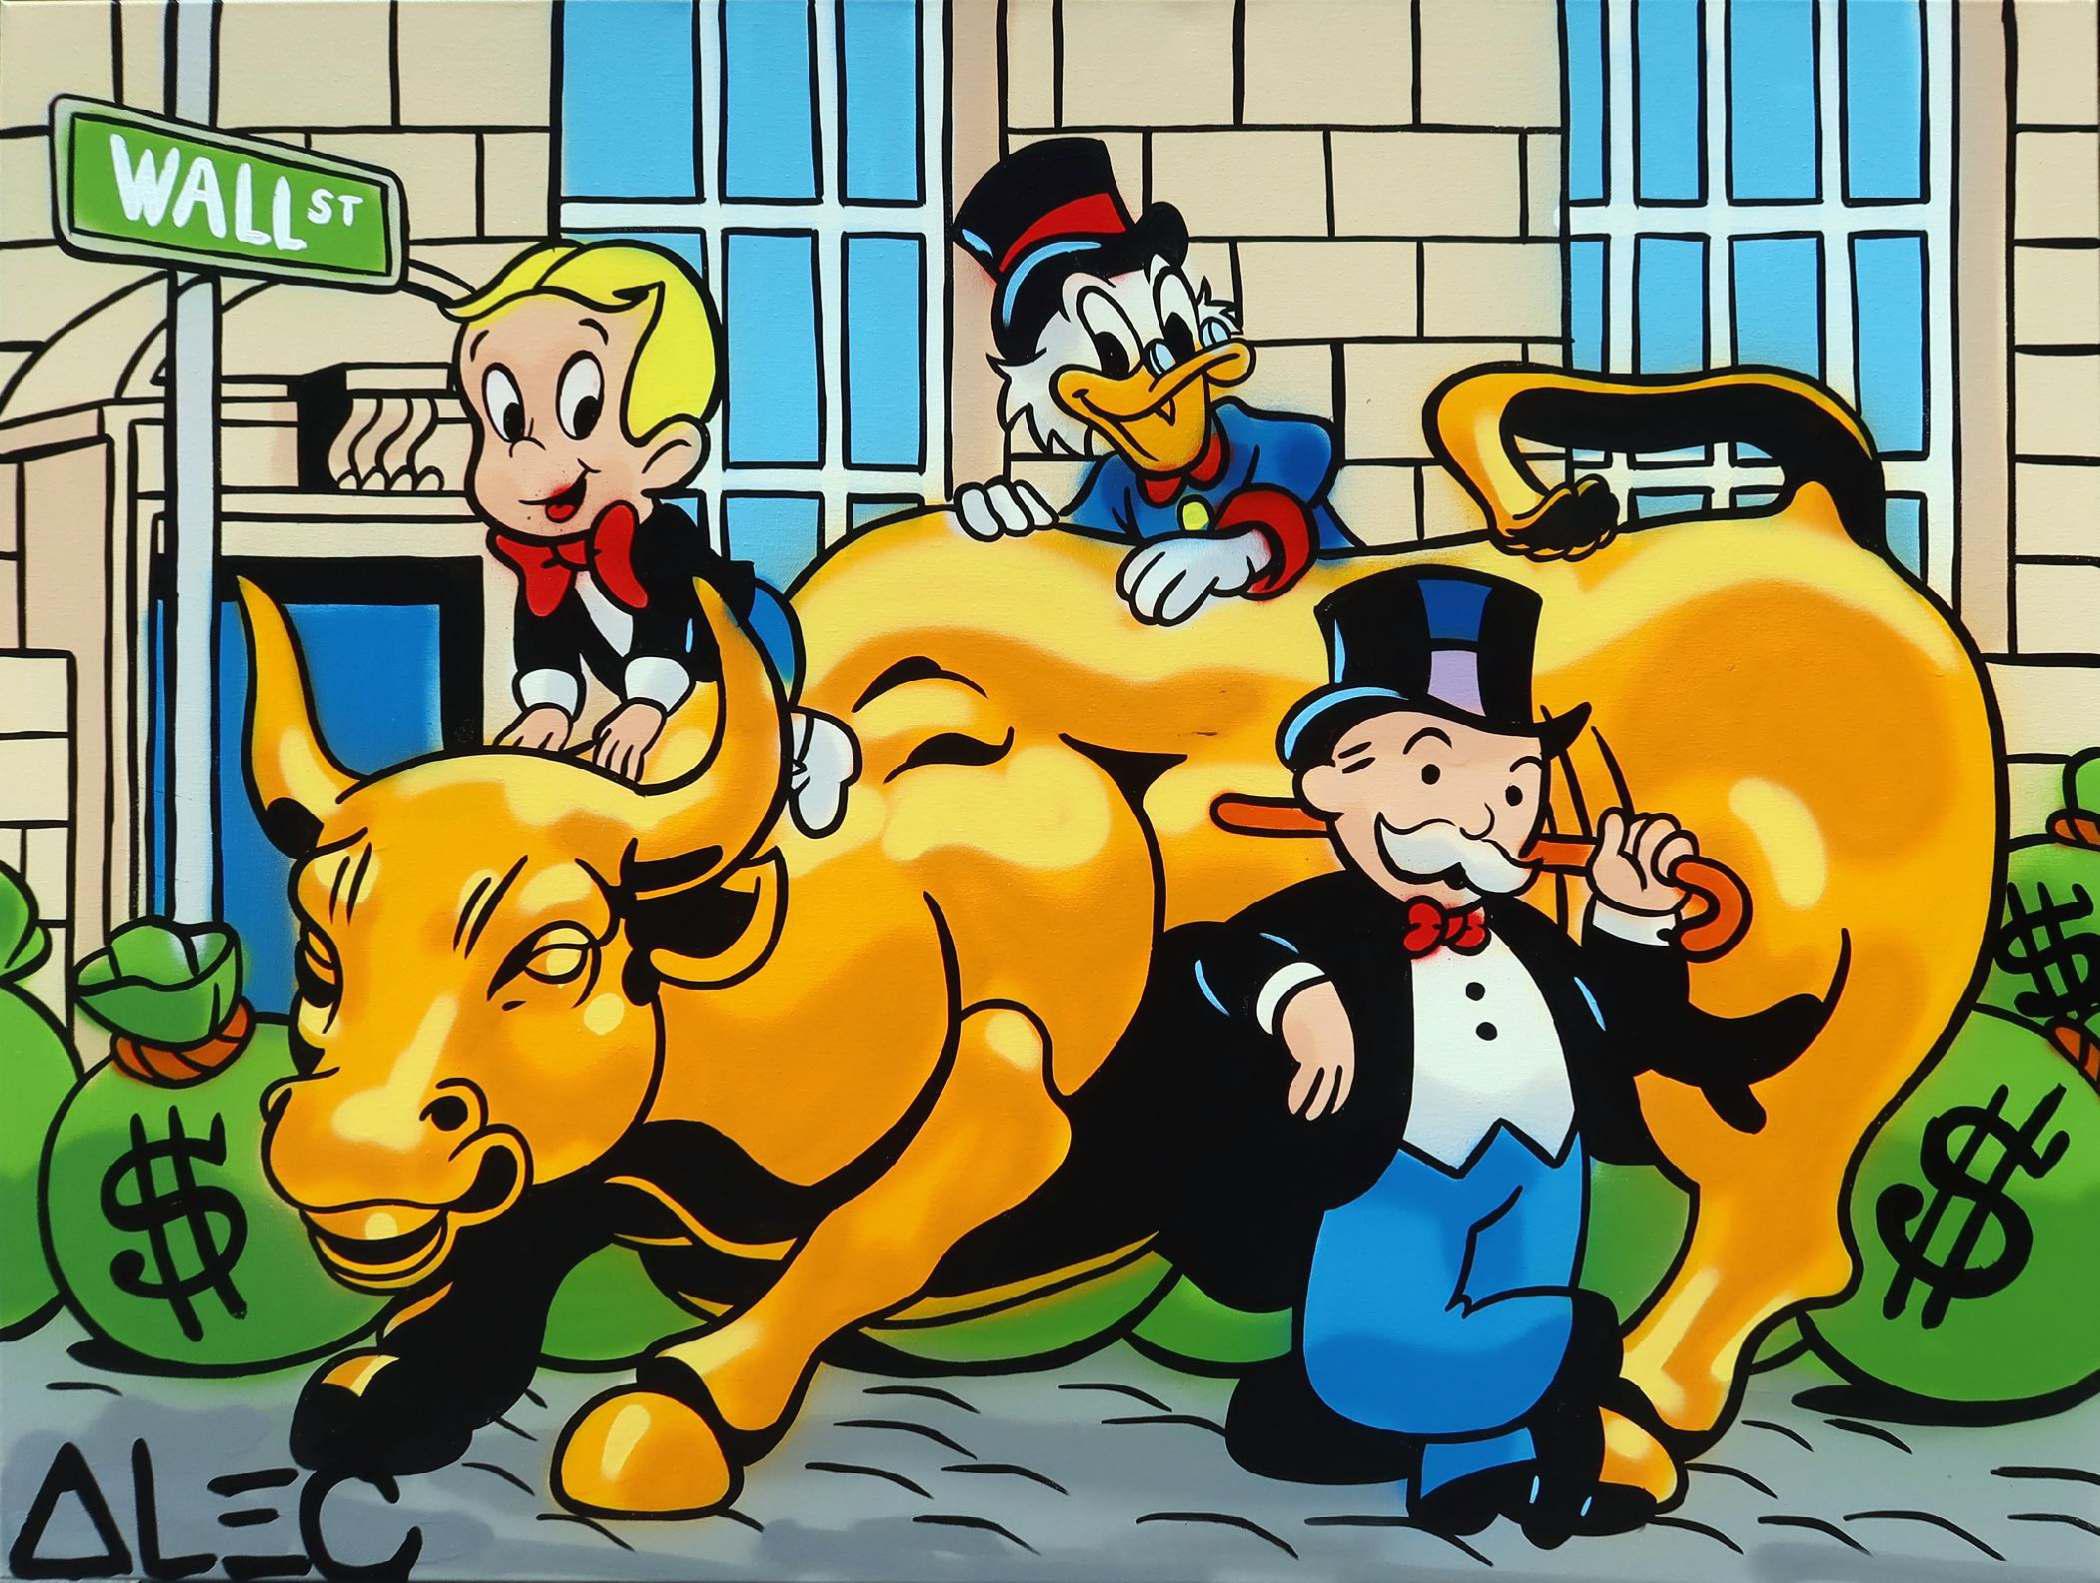 $ Team Wall St. Scrooge on Top Yellow Bull - Alec Monopoly - Eden Gallery